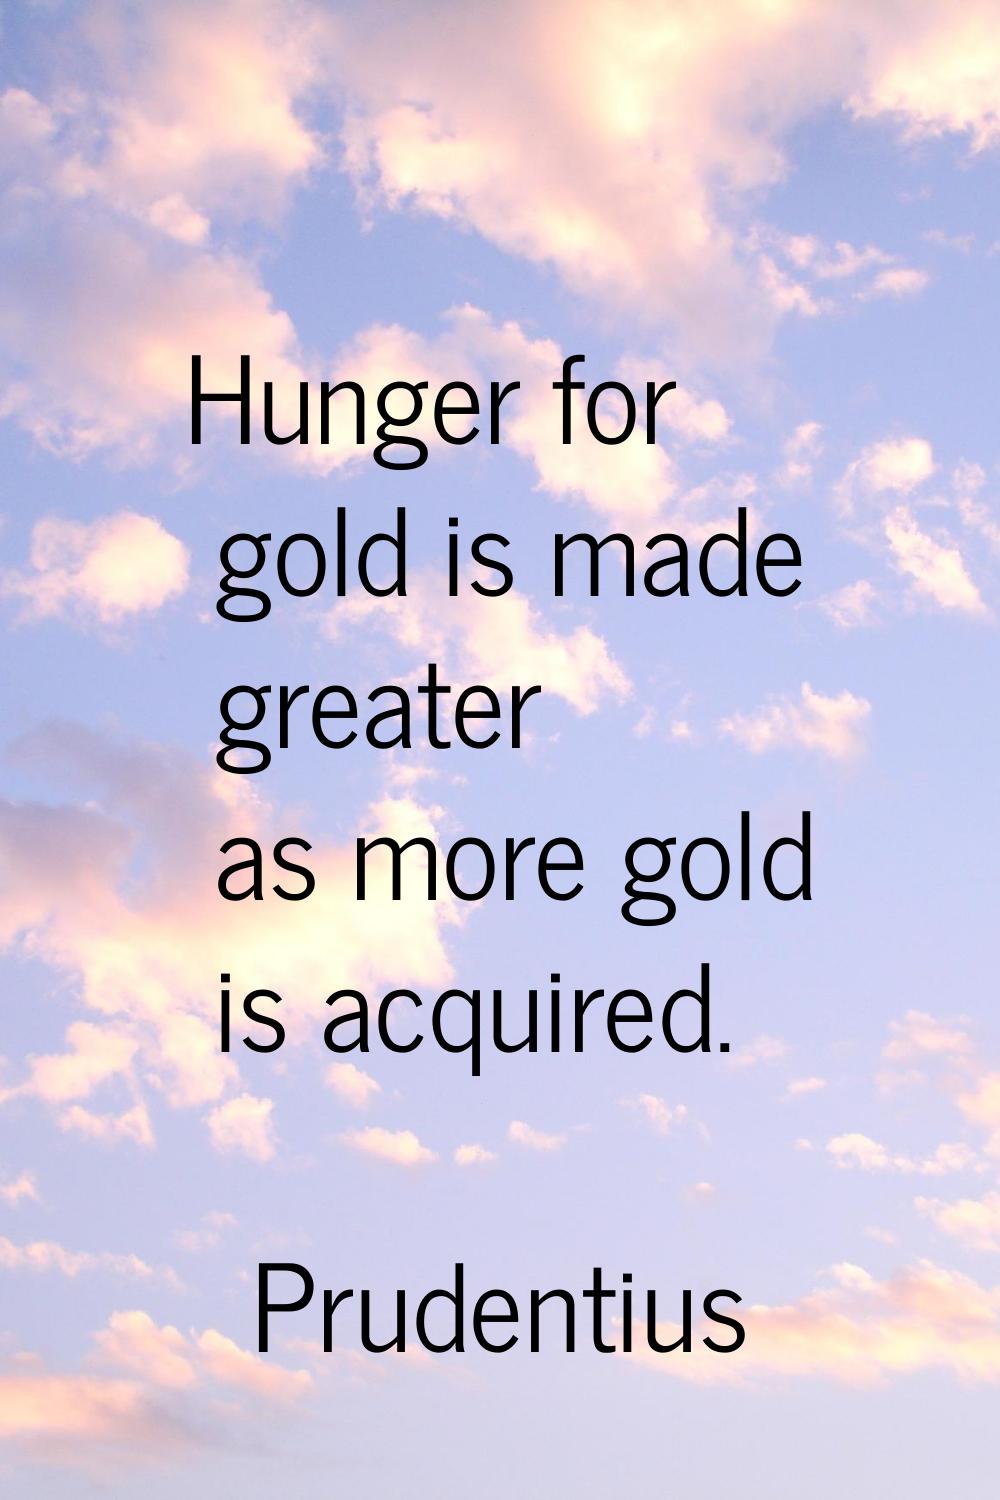 Hunger for gold is made greater as more gold is acquired.